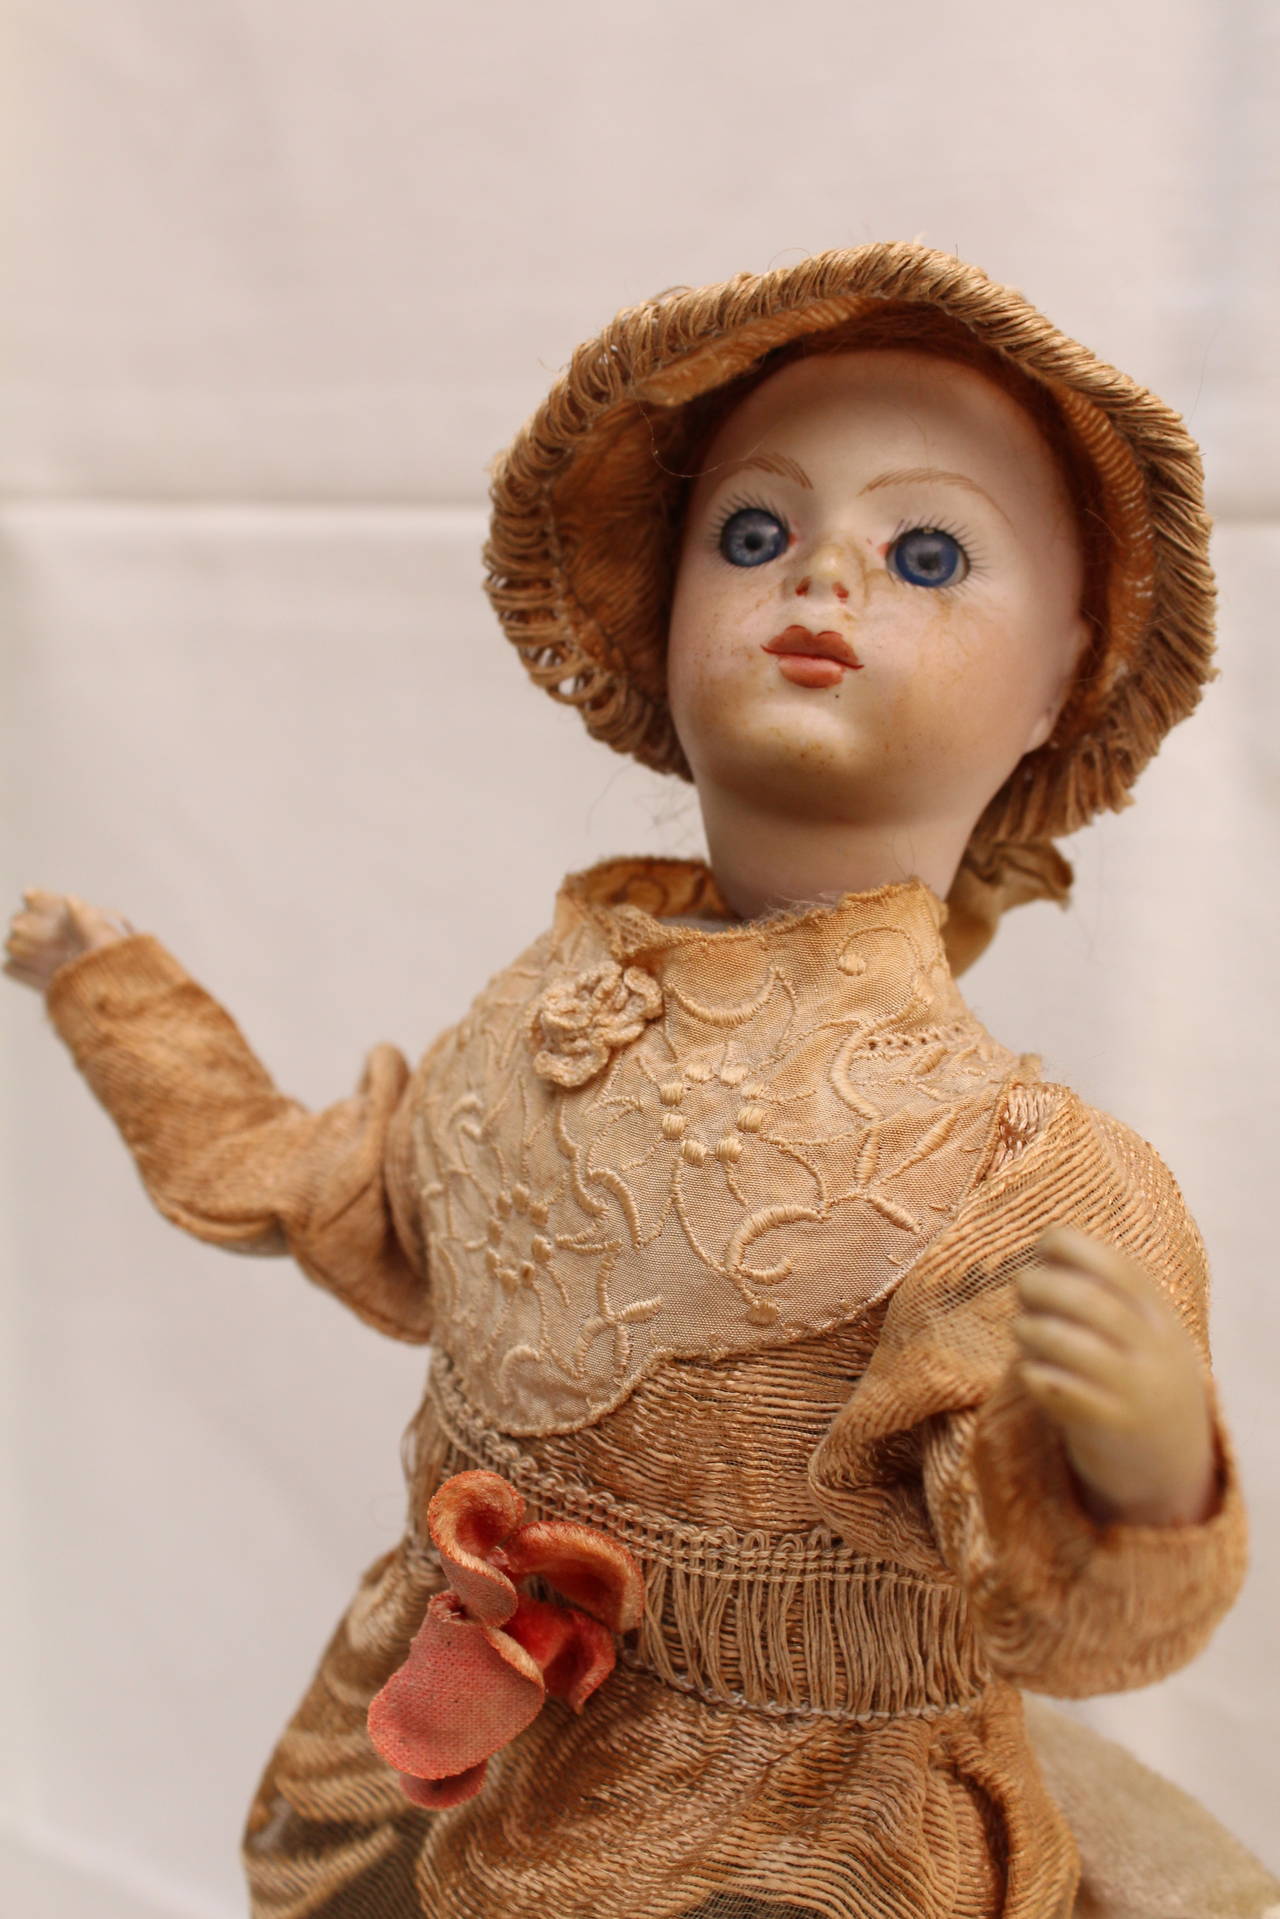 Fabric Mechanical Doll with Music Box by Bru, Late 19th Century